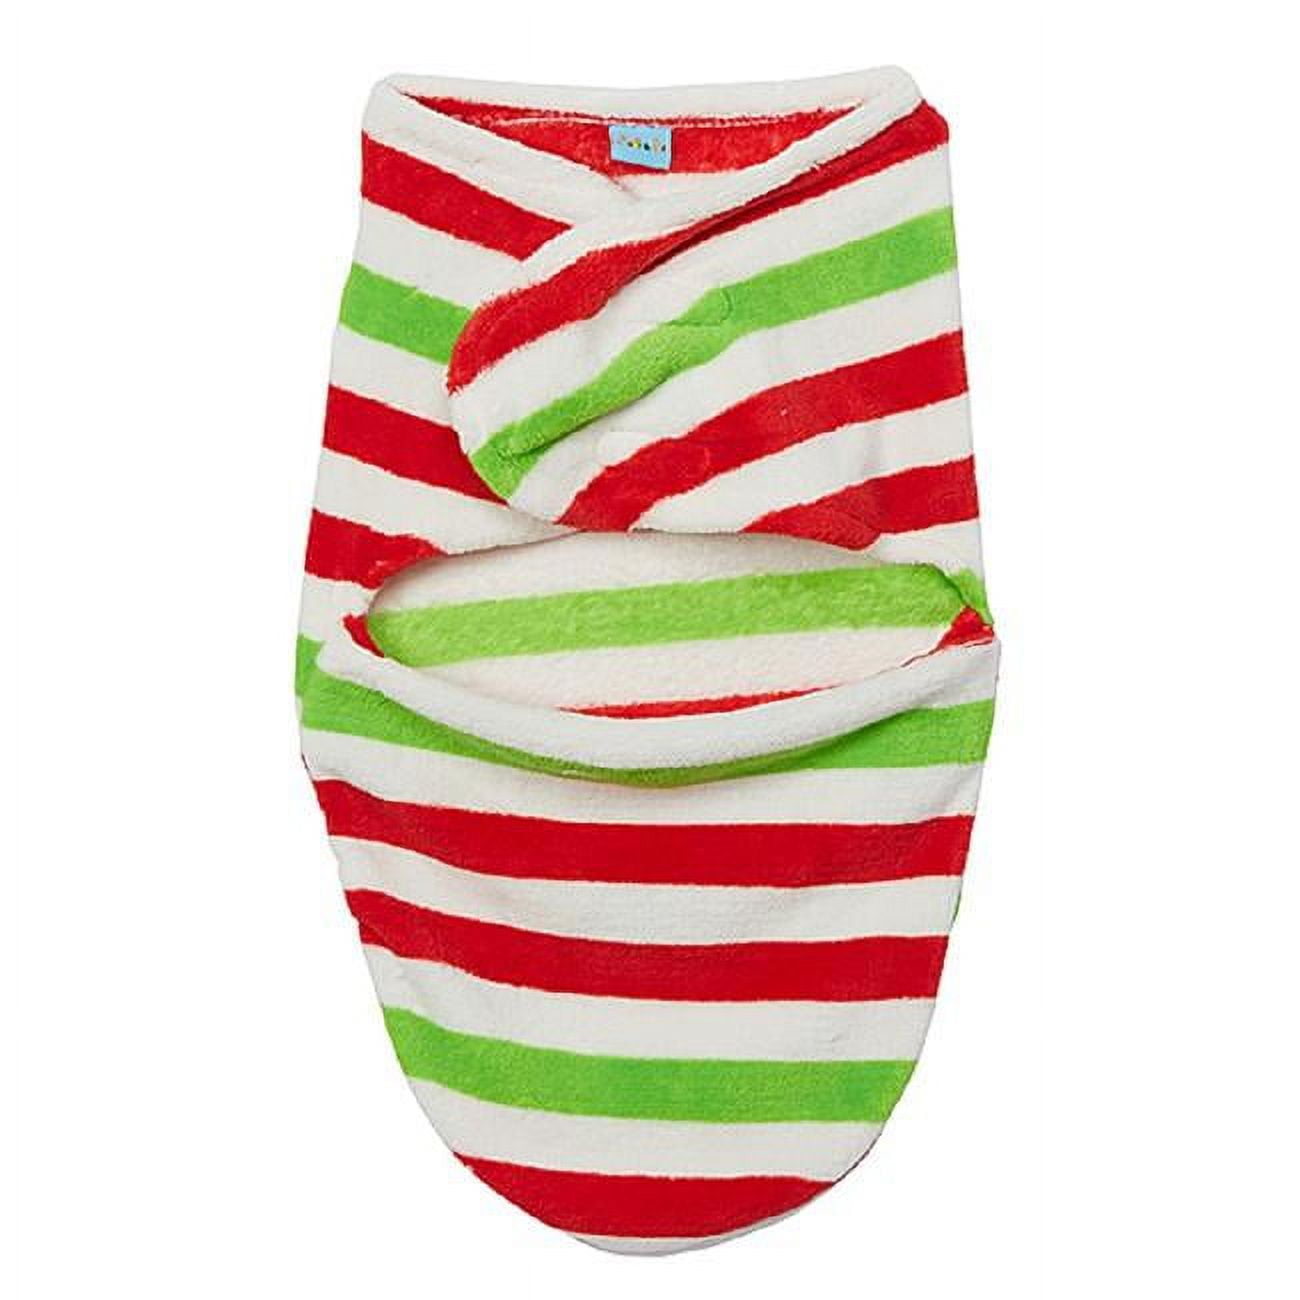 Picture of DDI 2343215 Newborn Coral Fleece Plush Sleep Swaddles - Red/Green Stripes Case of 24